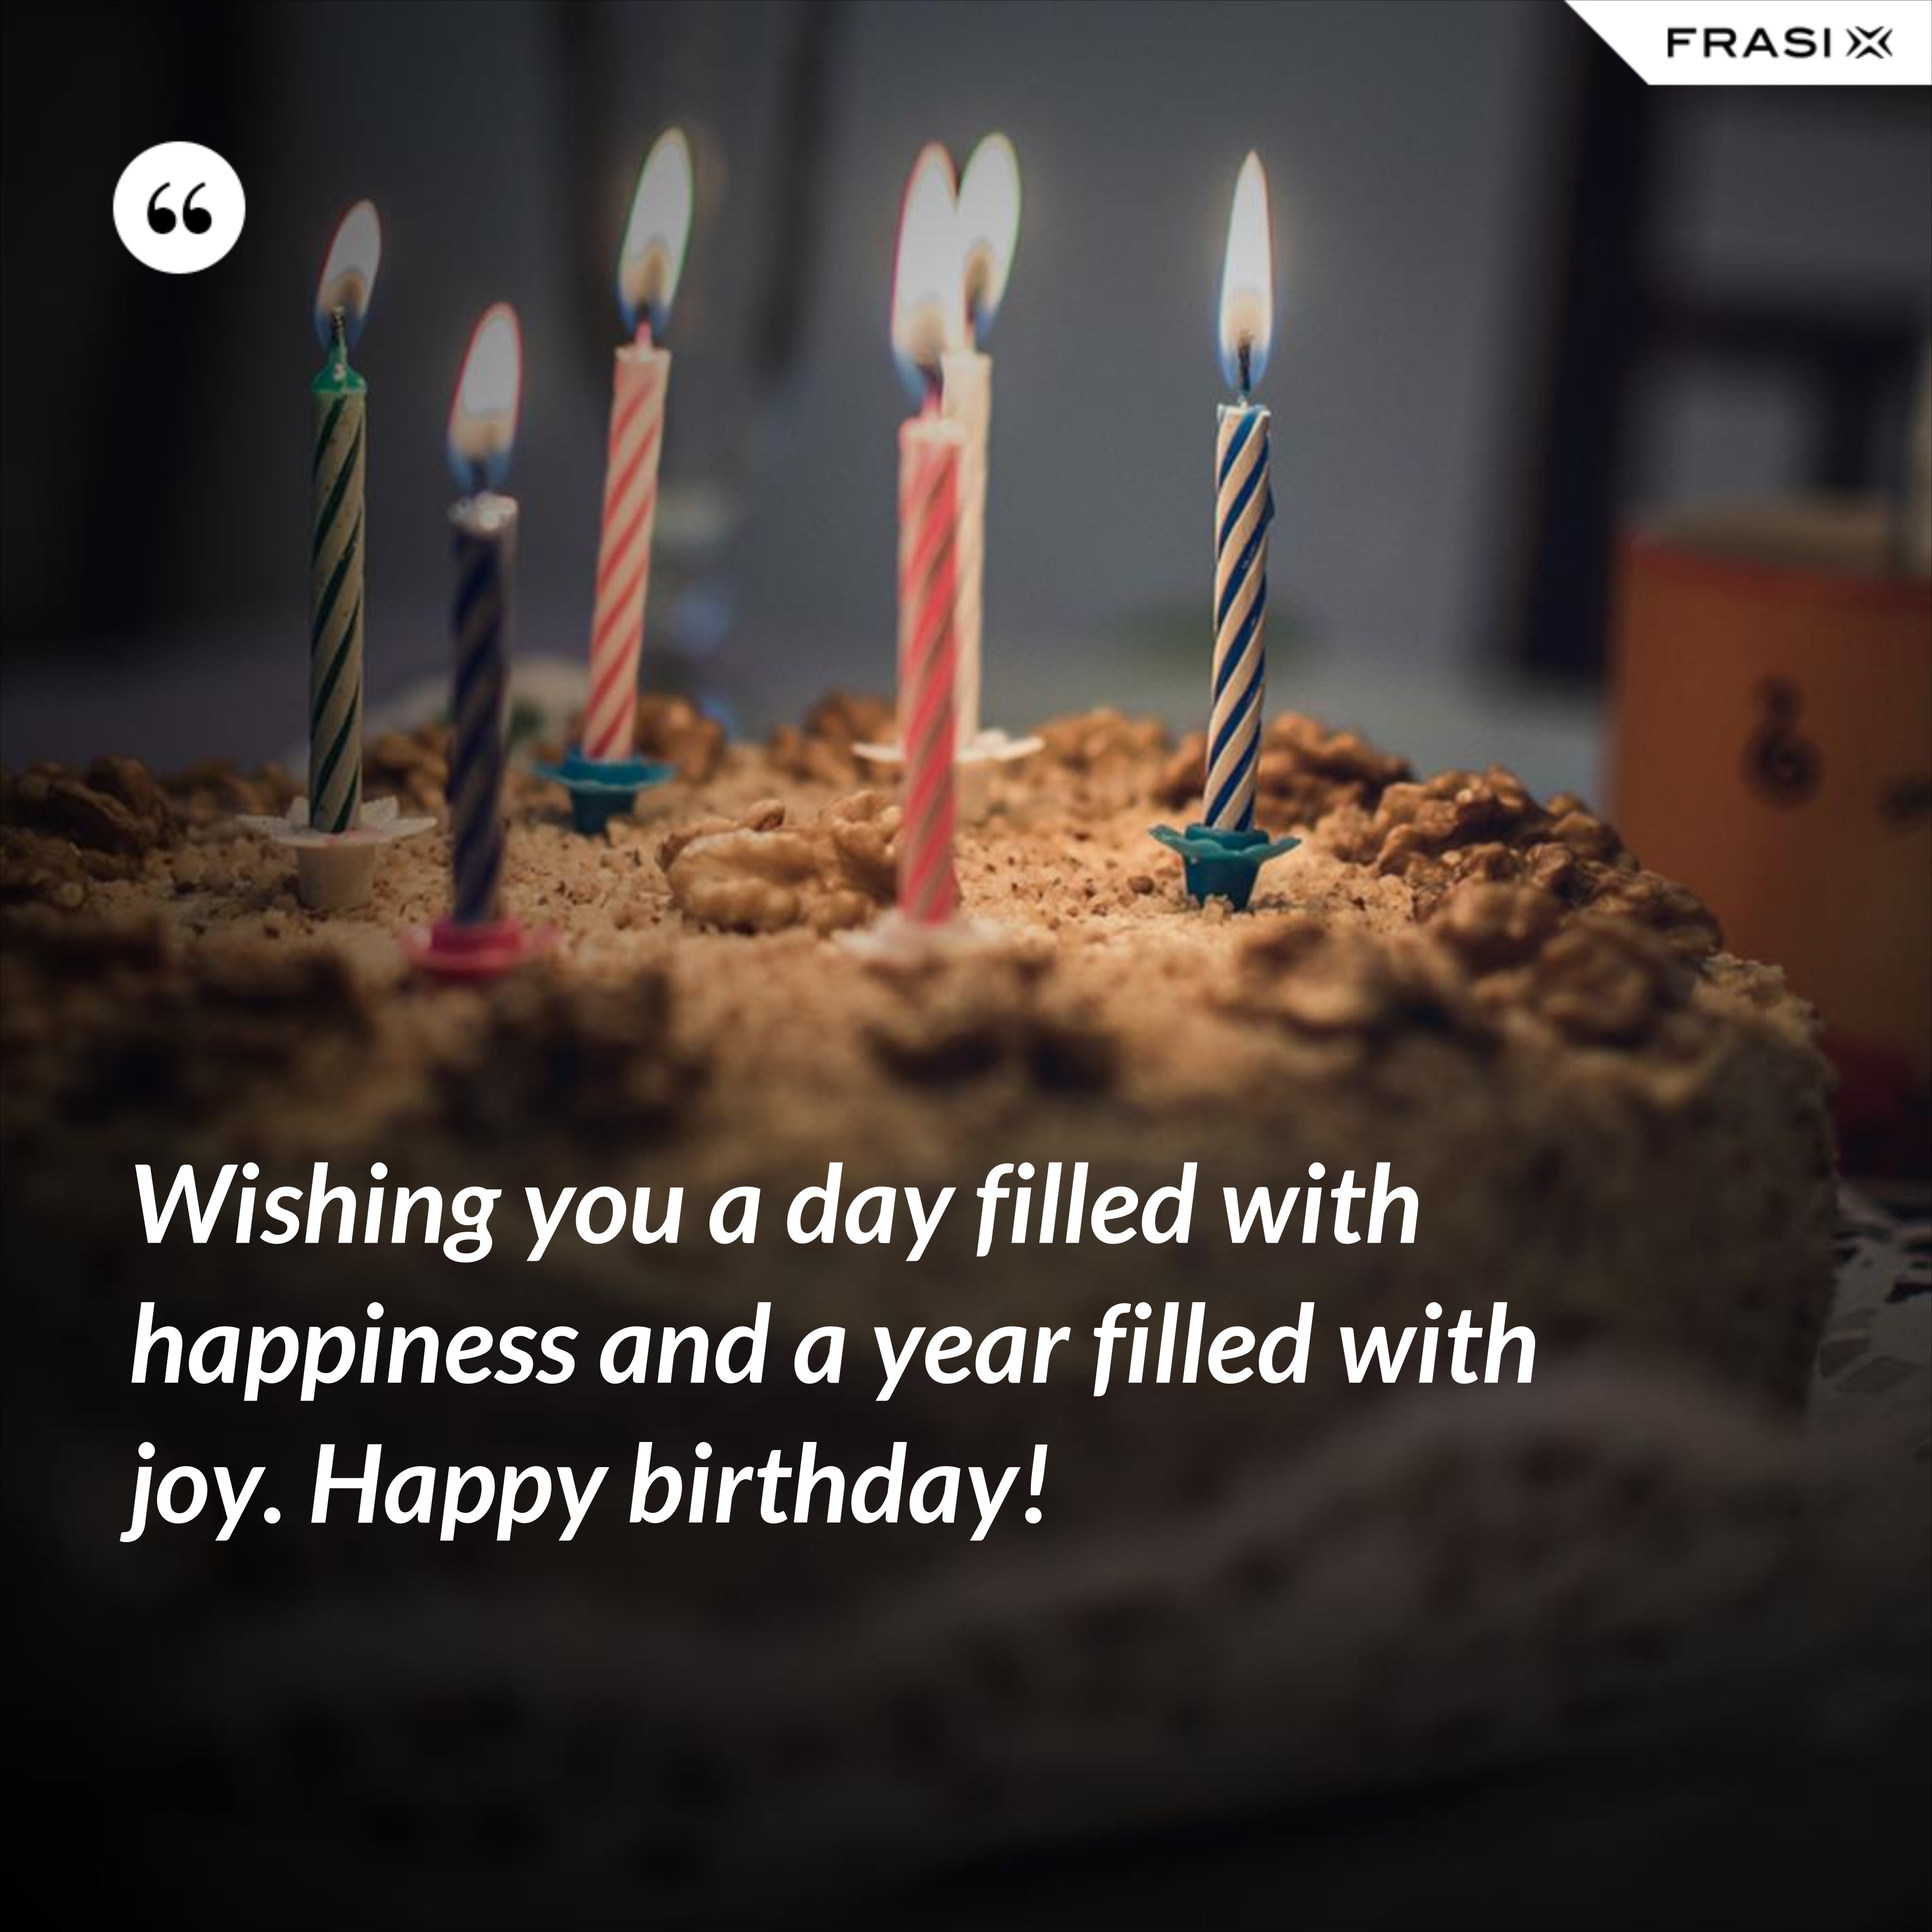 Wishing you a day filled with happiness and a year filled with joy. Happy birthday! - Anonimo